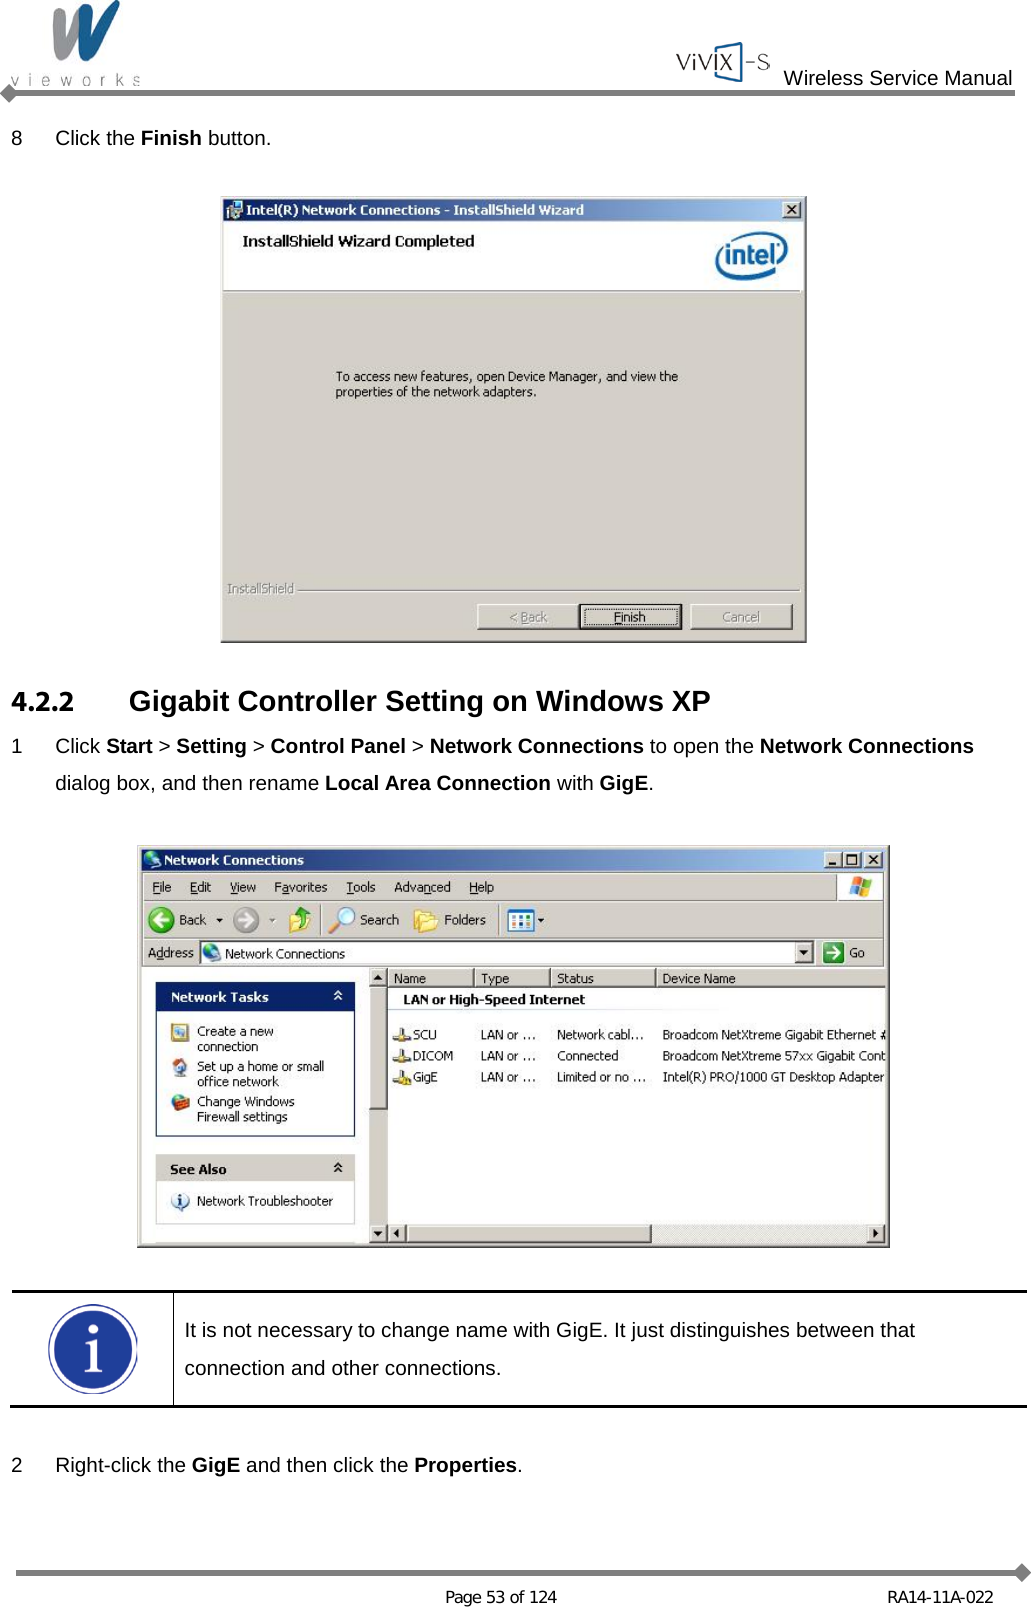  Wireless Service Manual   Page 53 of 124 RA14-11A-022 8  Click the Finish button.    4.2.2 Gigabit Controller Setting on Windows XP 1  Click Start &gt; Setting &gt; Control Panel &gt; Network Connections to open the Network Connections   dialog box, and then rename Local Area Connection with GigE.     It is not necessary to change name with GigE. It just distinguishes between that connection and other connections.  2  Right-click the GigE and then click the Properties.  